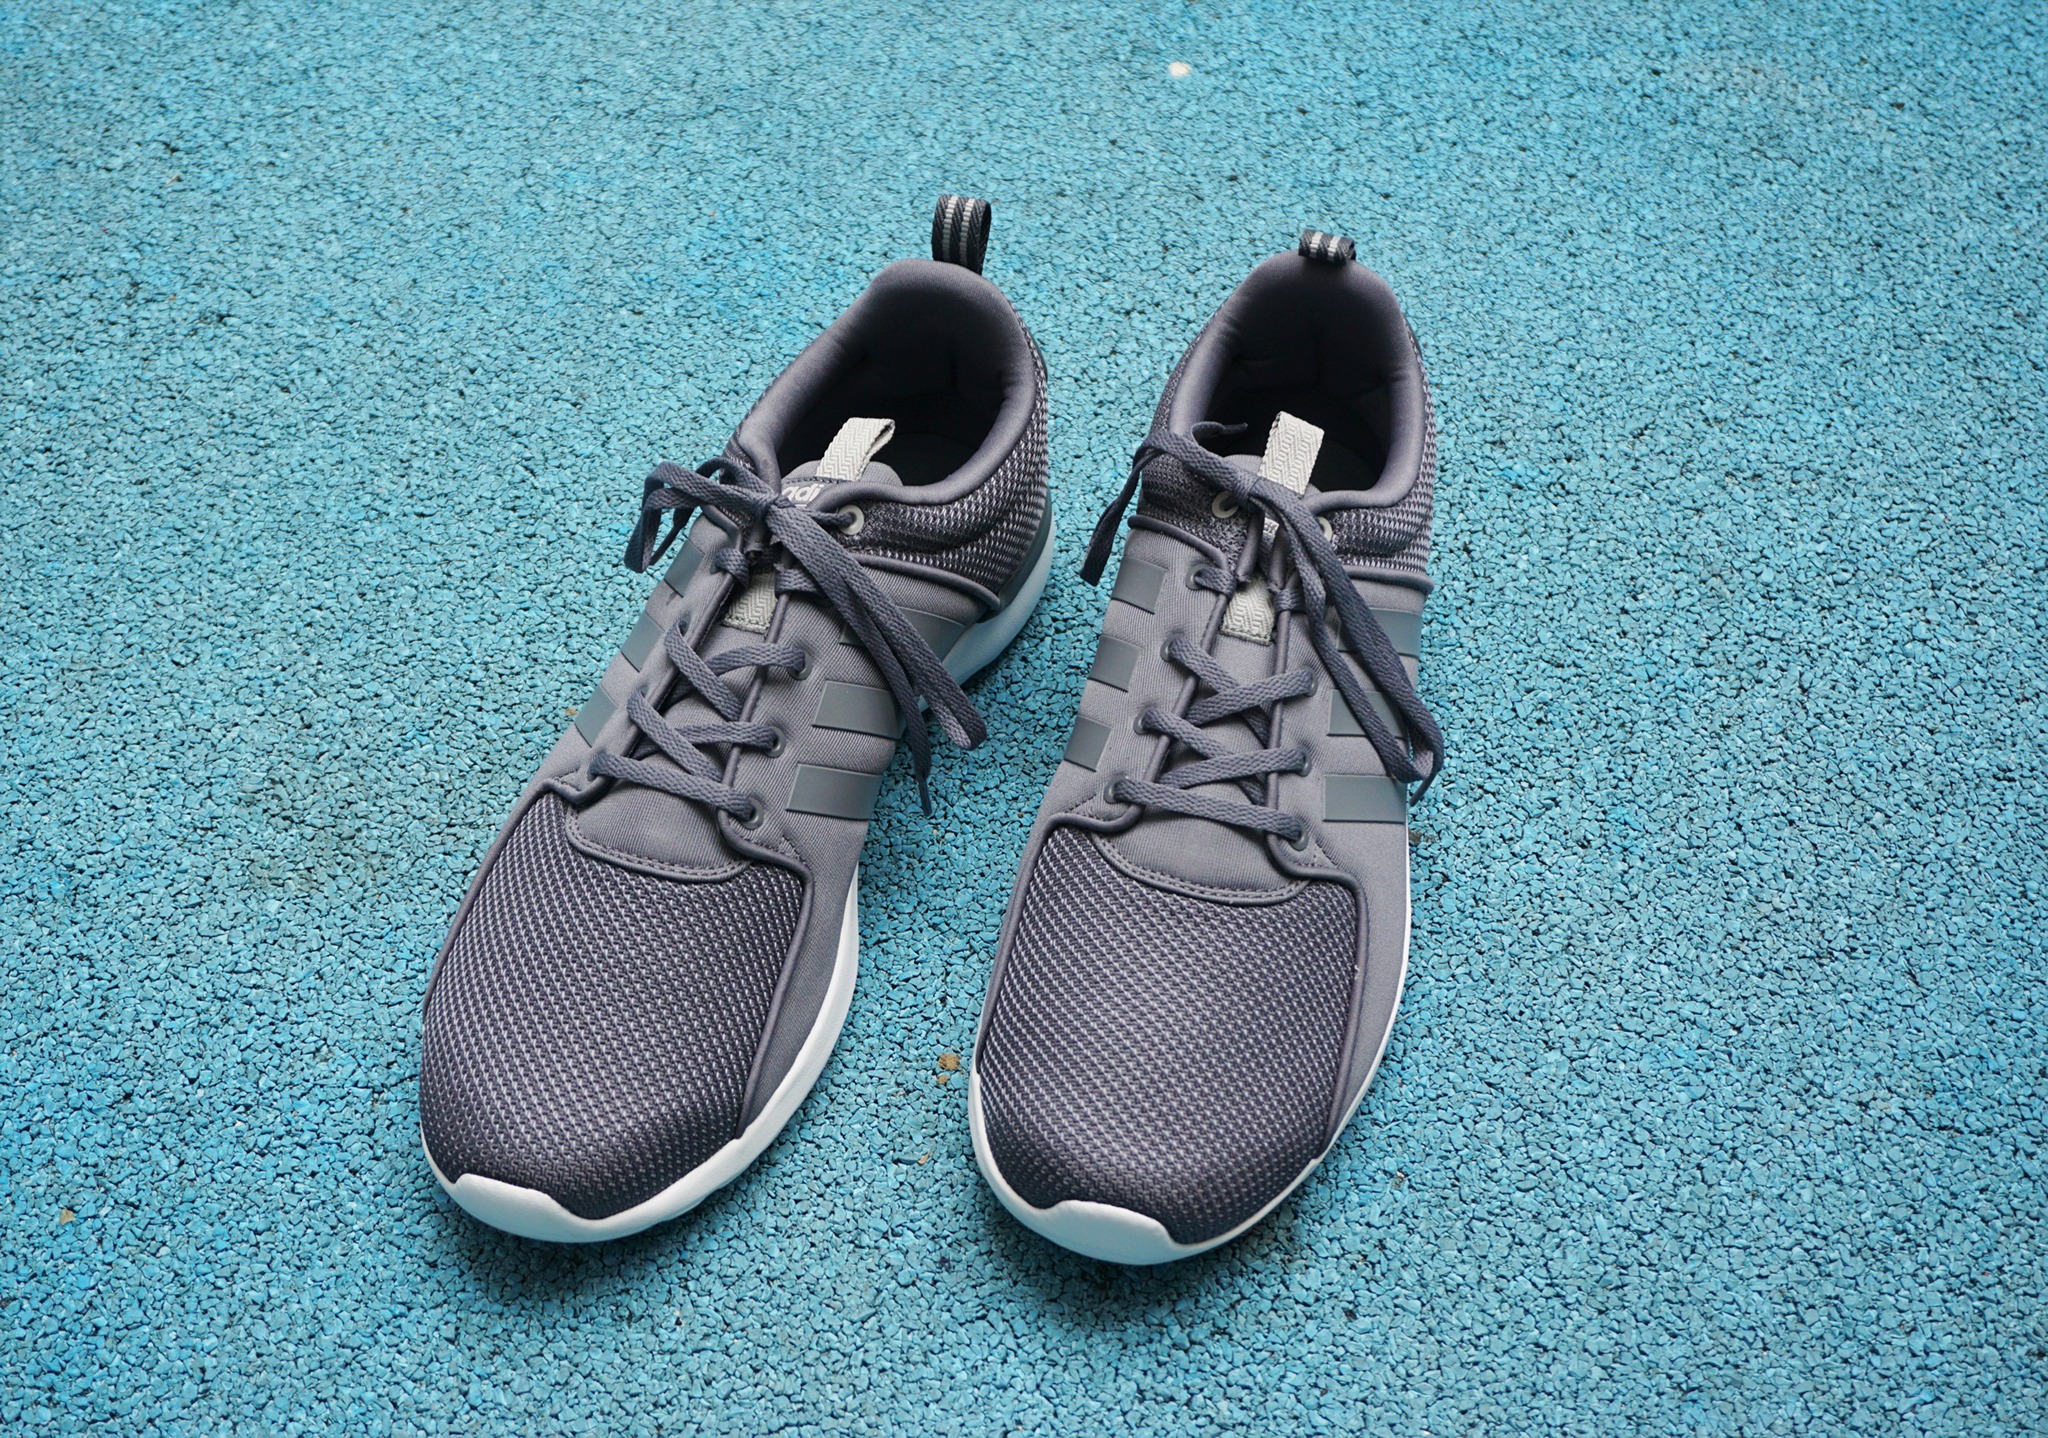 Adidas Neo Cloudfoam Lite Racer Proves That Men’s Running Shoes Need ...